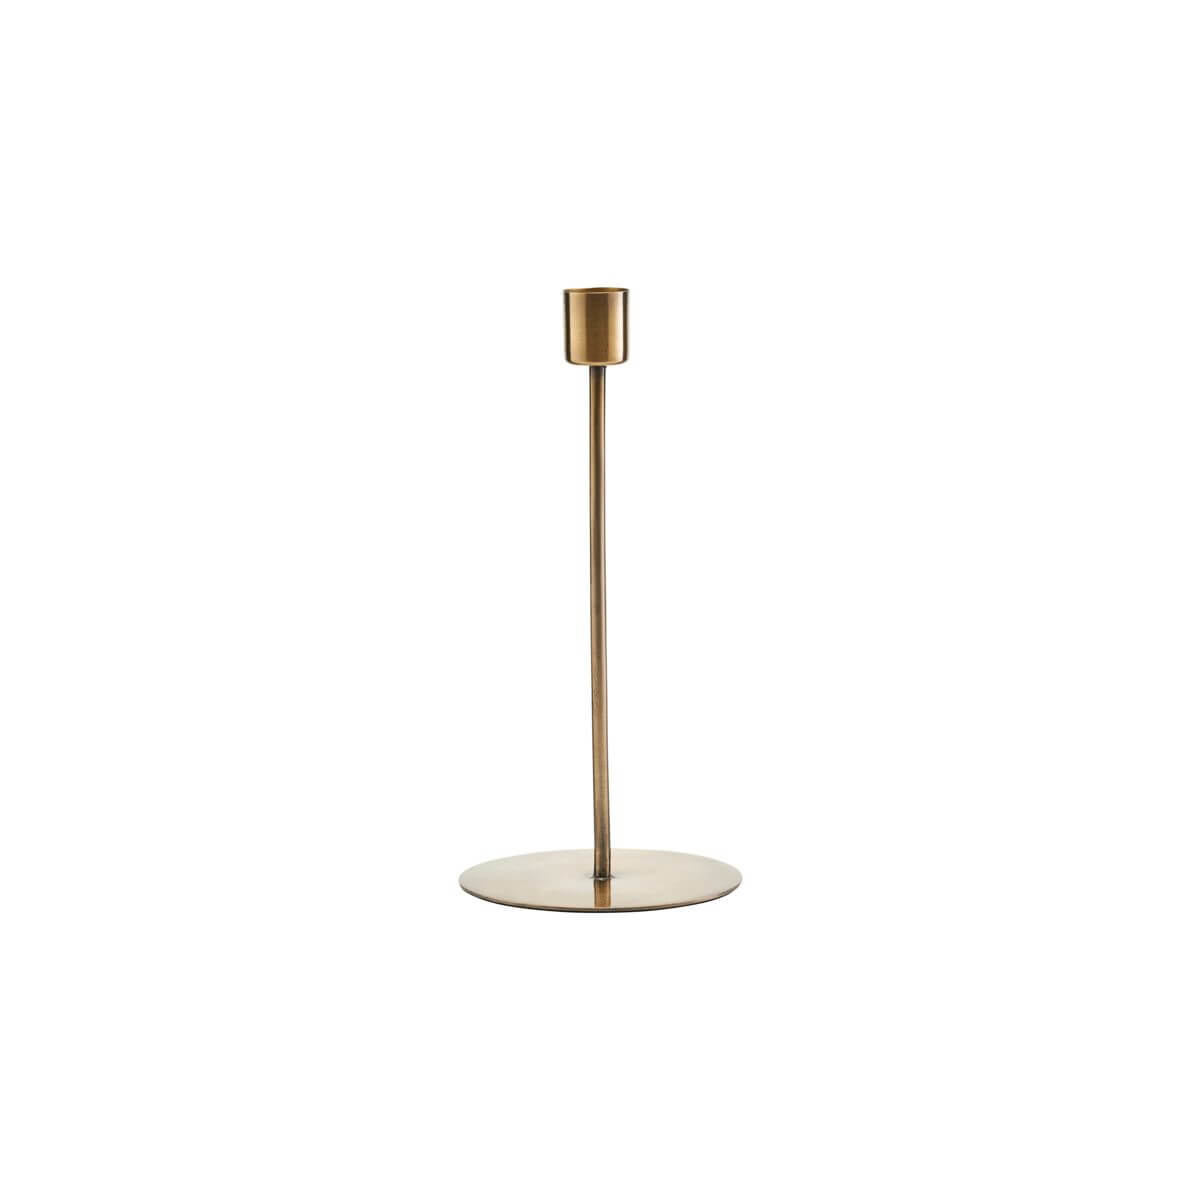 House Doctor - Anit Candle Holder - Brass Finish (SP0854)